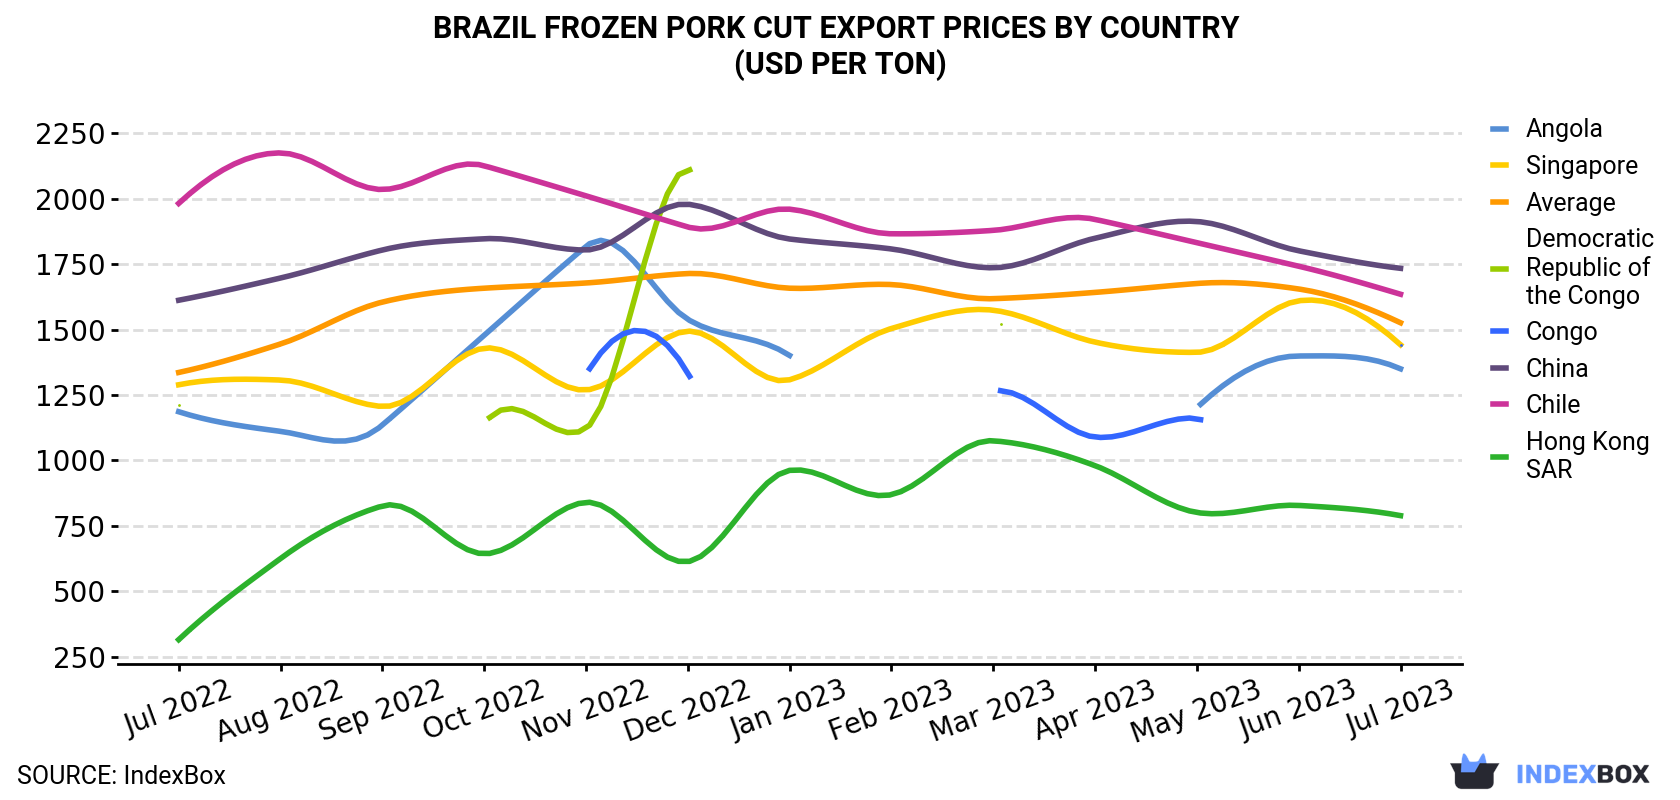 Brazil Frozen Pork Cut Export Prices By Country (USD Per Ton)